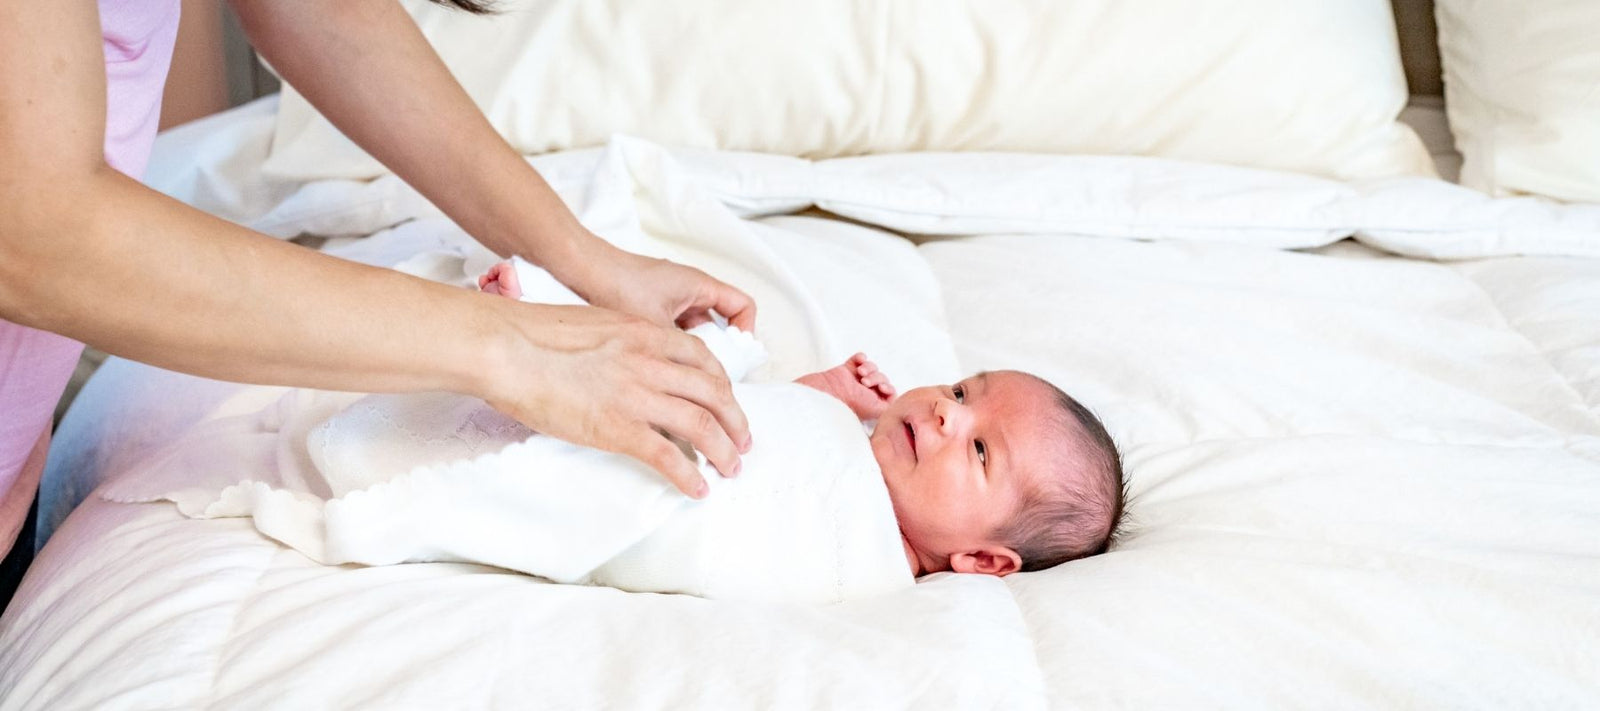 How to Swaddle A Baby: Step by Step Guide